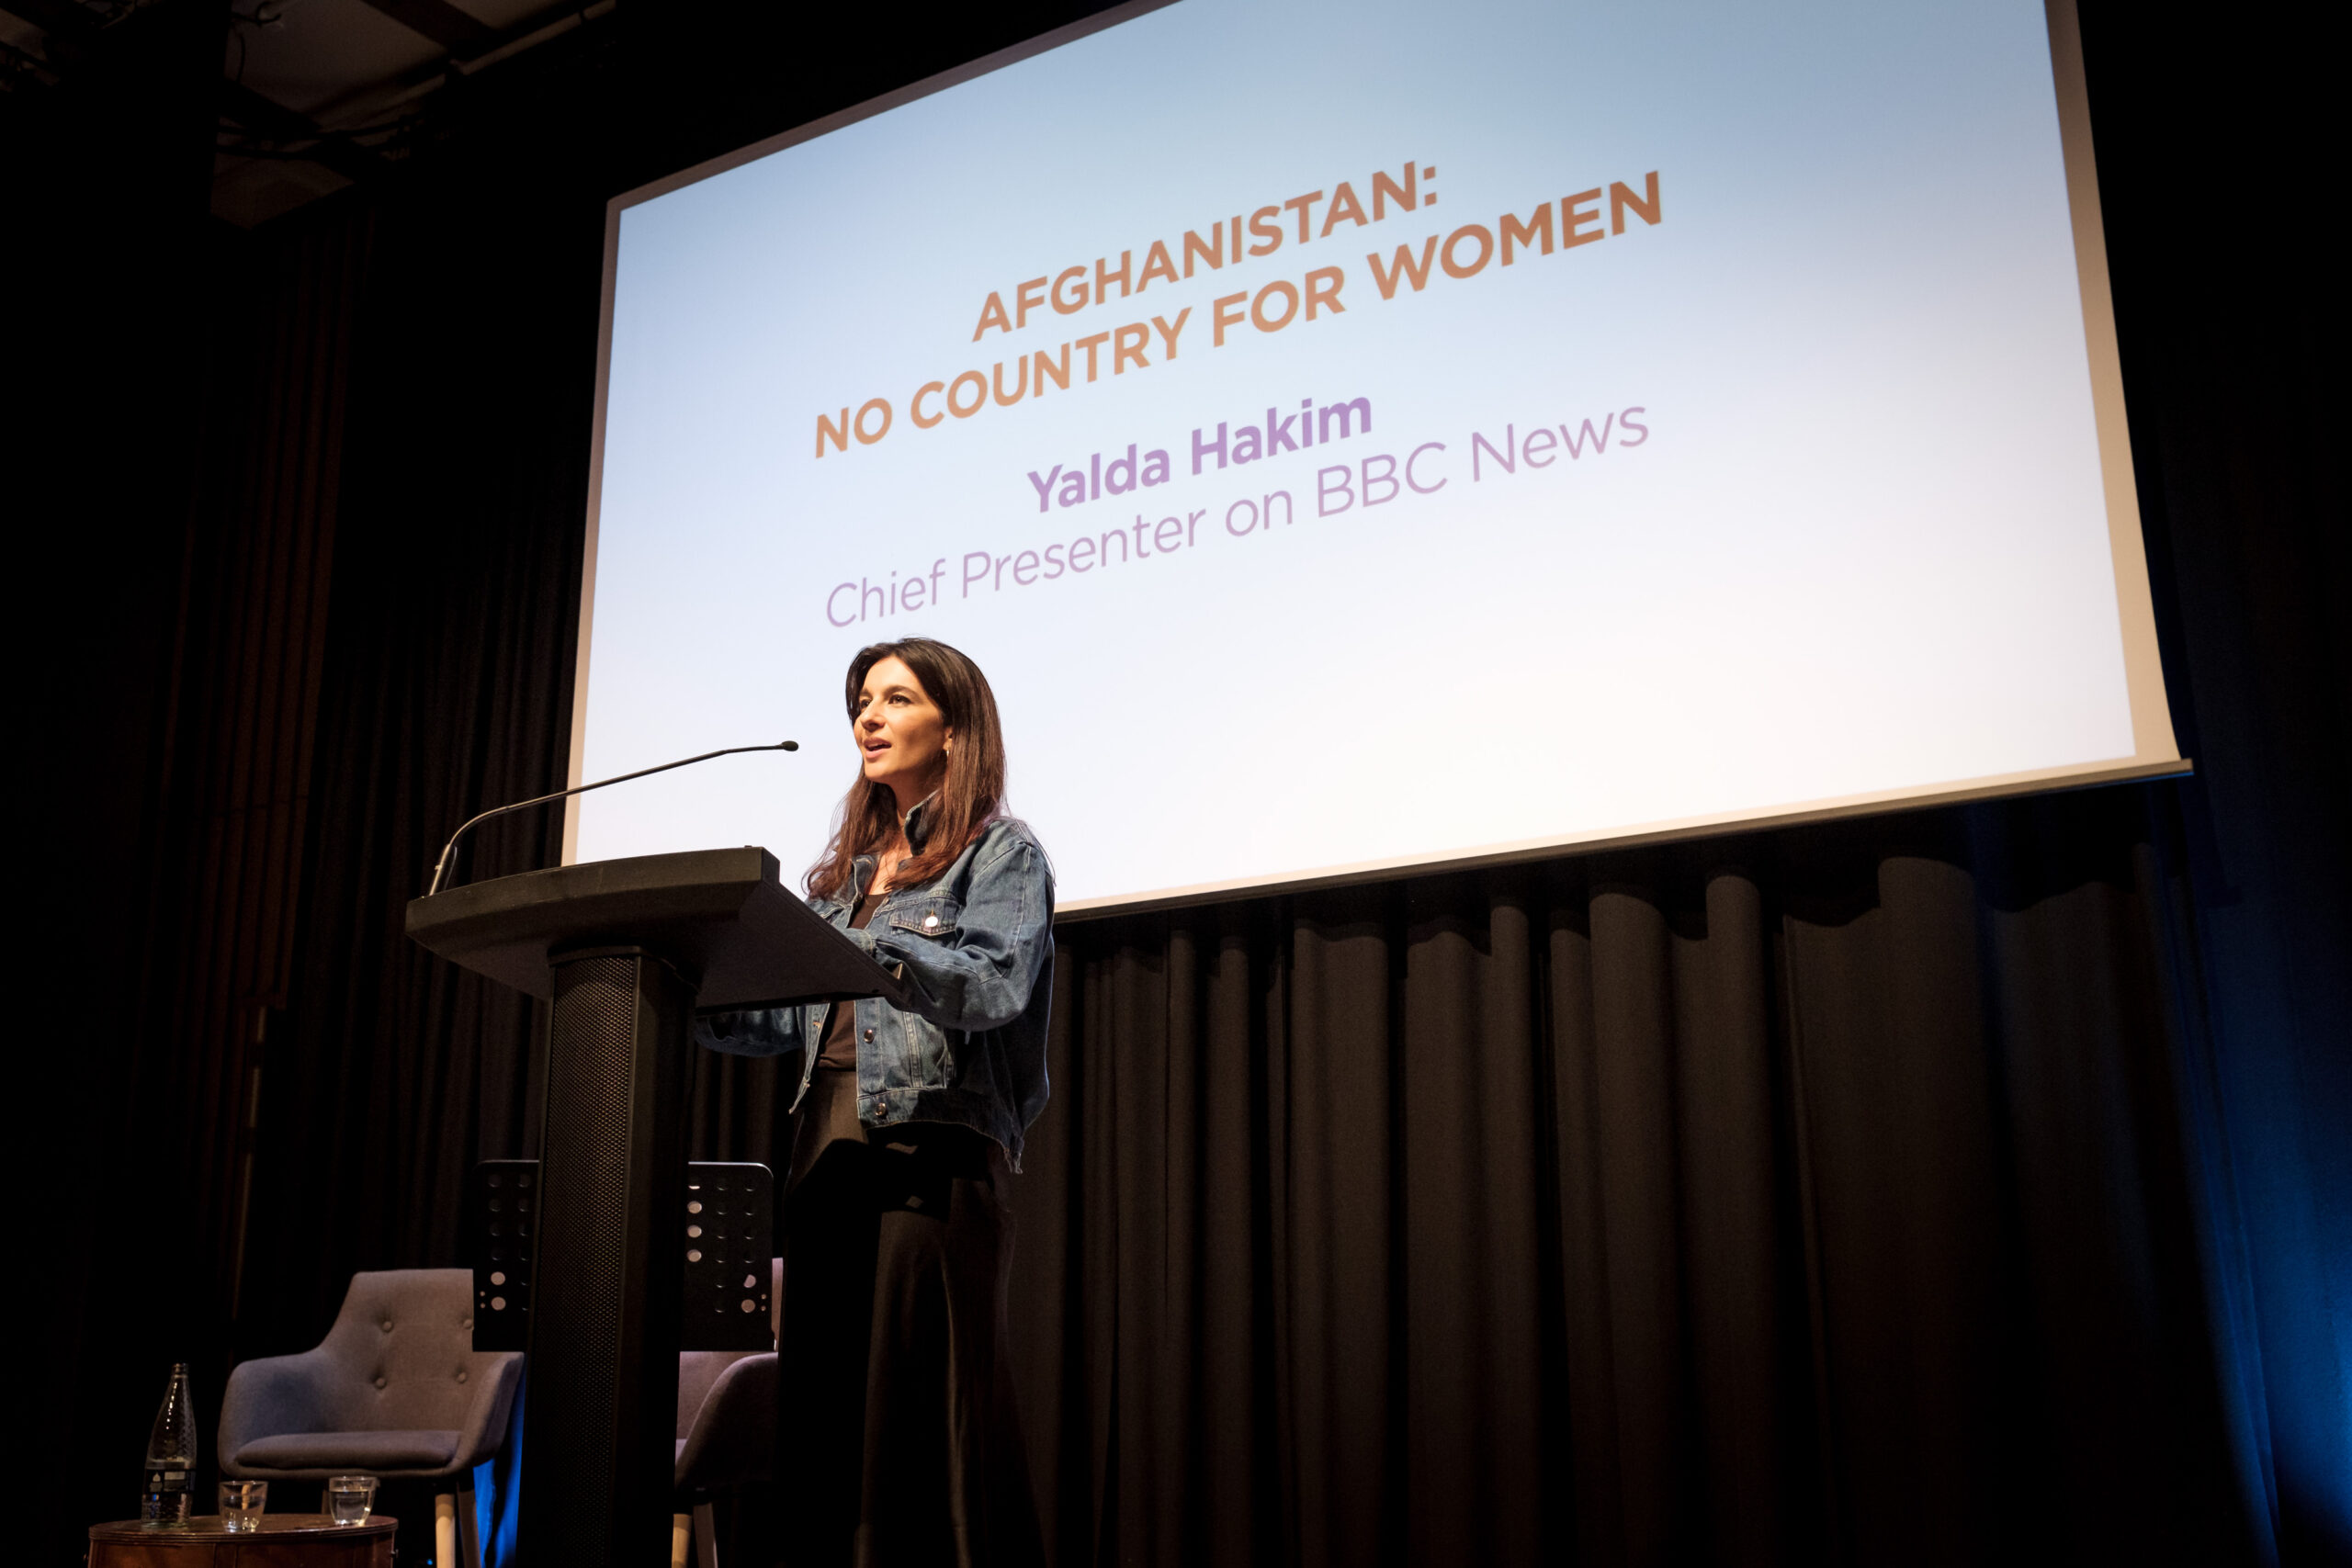 BBC presenter Yalda Hakim presents at the HIAS+JCORE launch event. She is standing at a lectern in front of a presentation titled: 'Afghanistan: No country for women.'